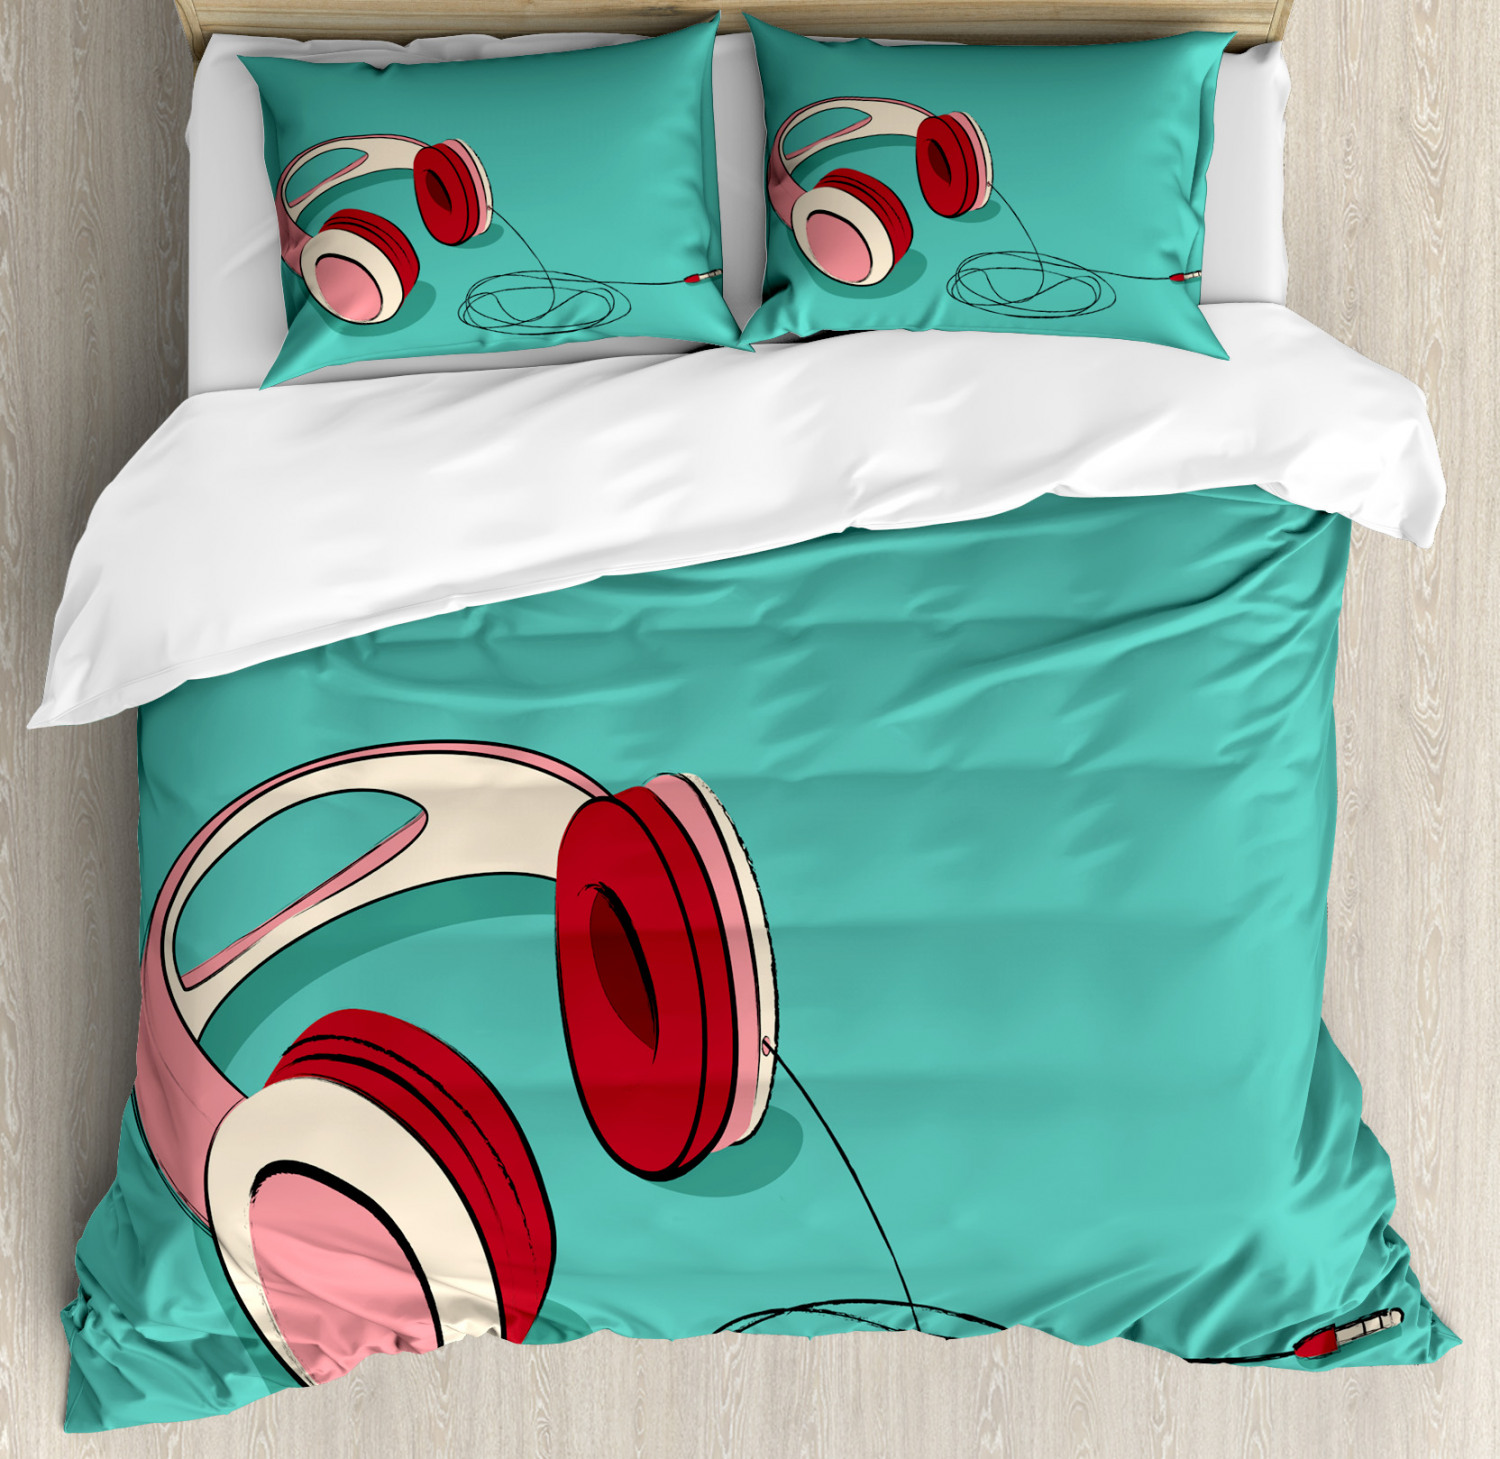 Retro Indie Duvet Cover Set Twin Queen King Sizes With Pillow